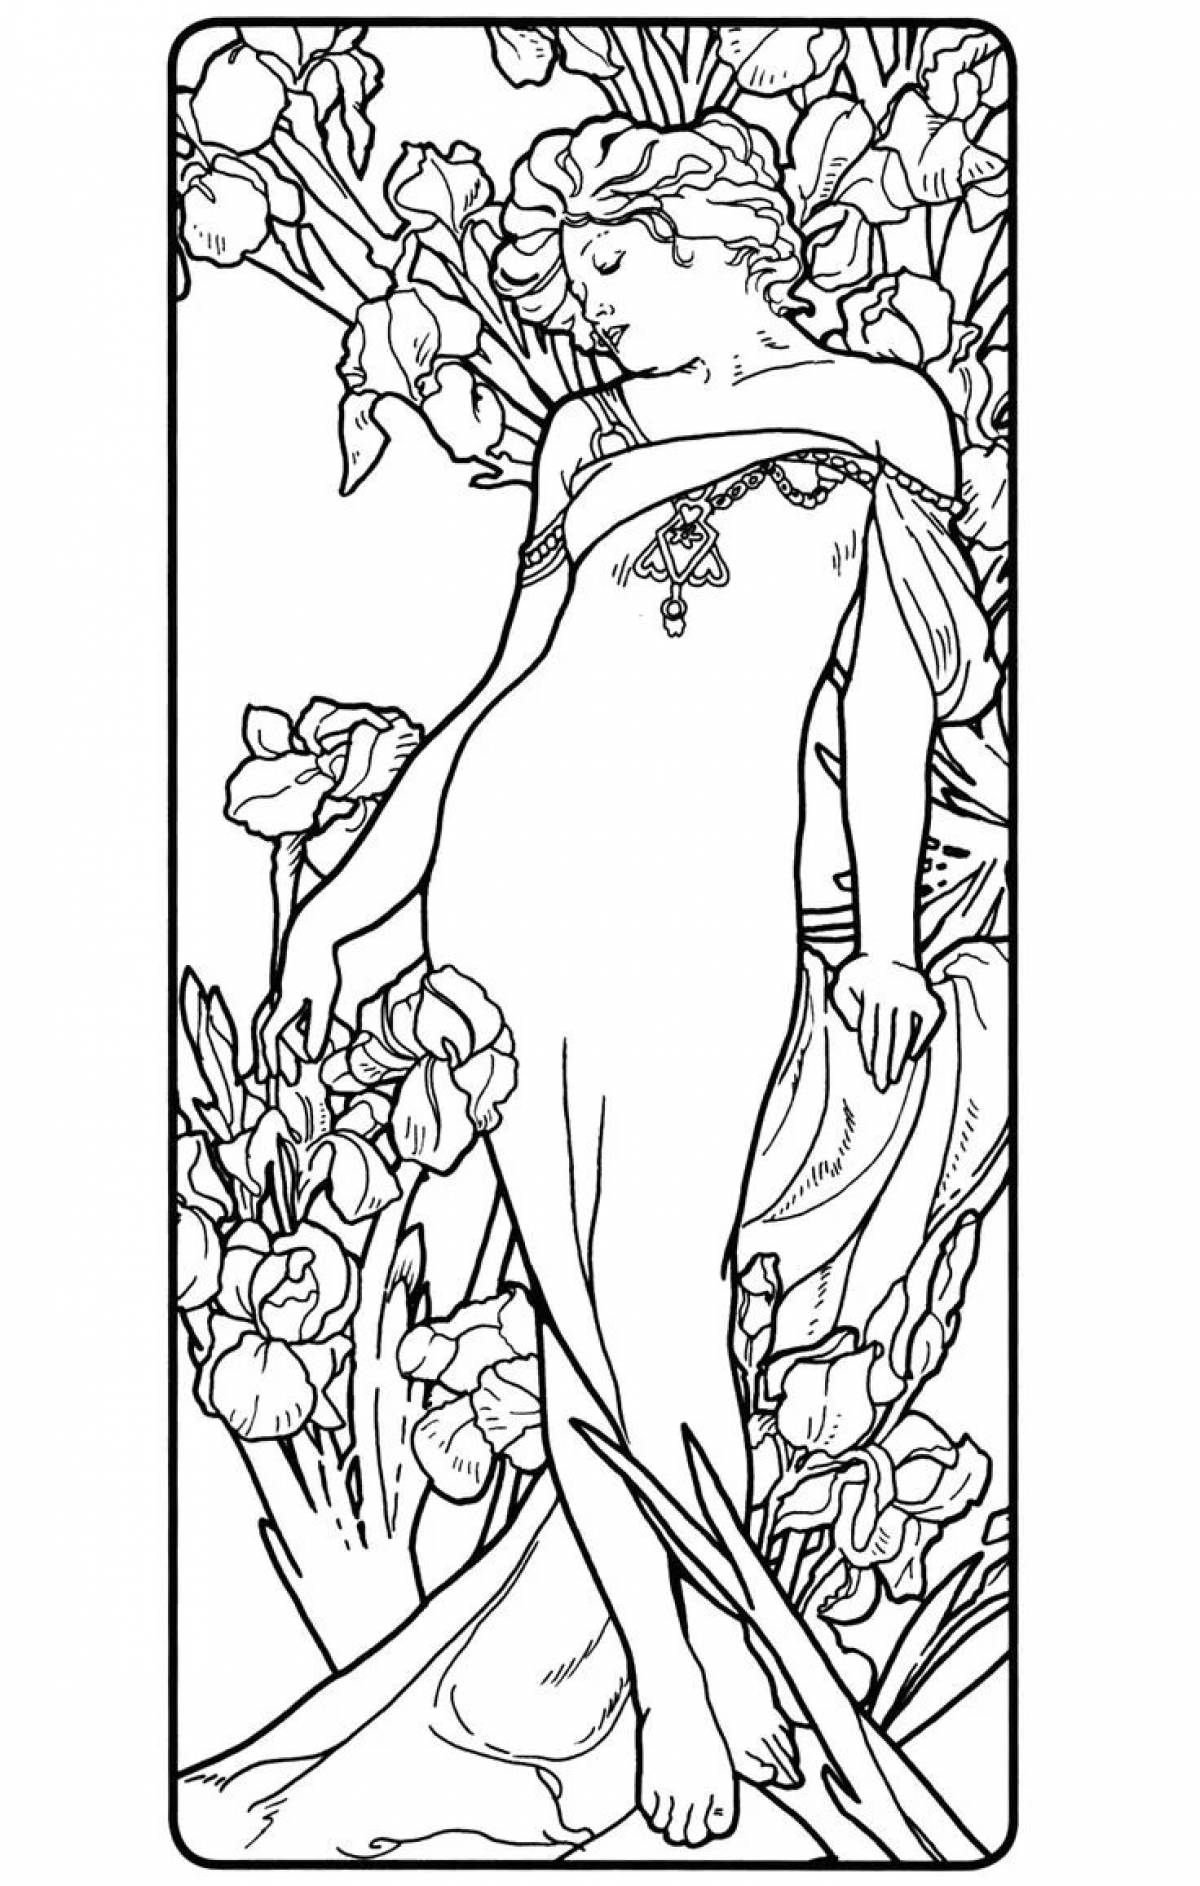 Coloring book exalted gigolo mucha